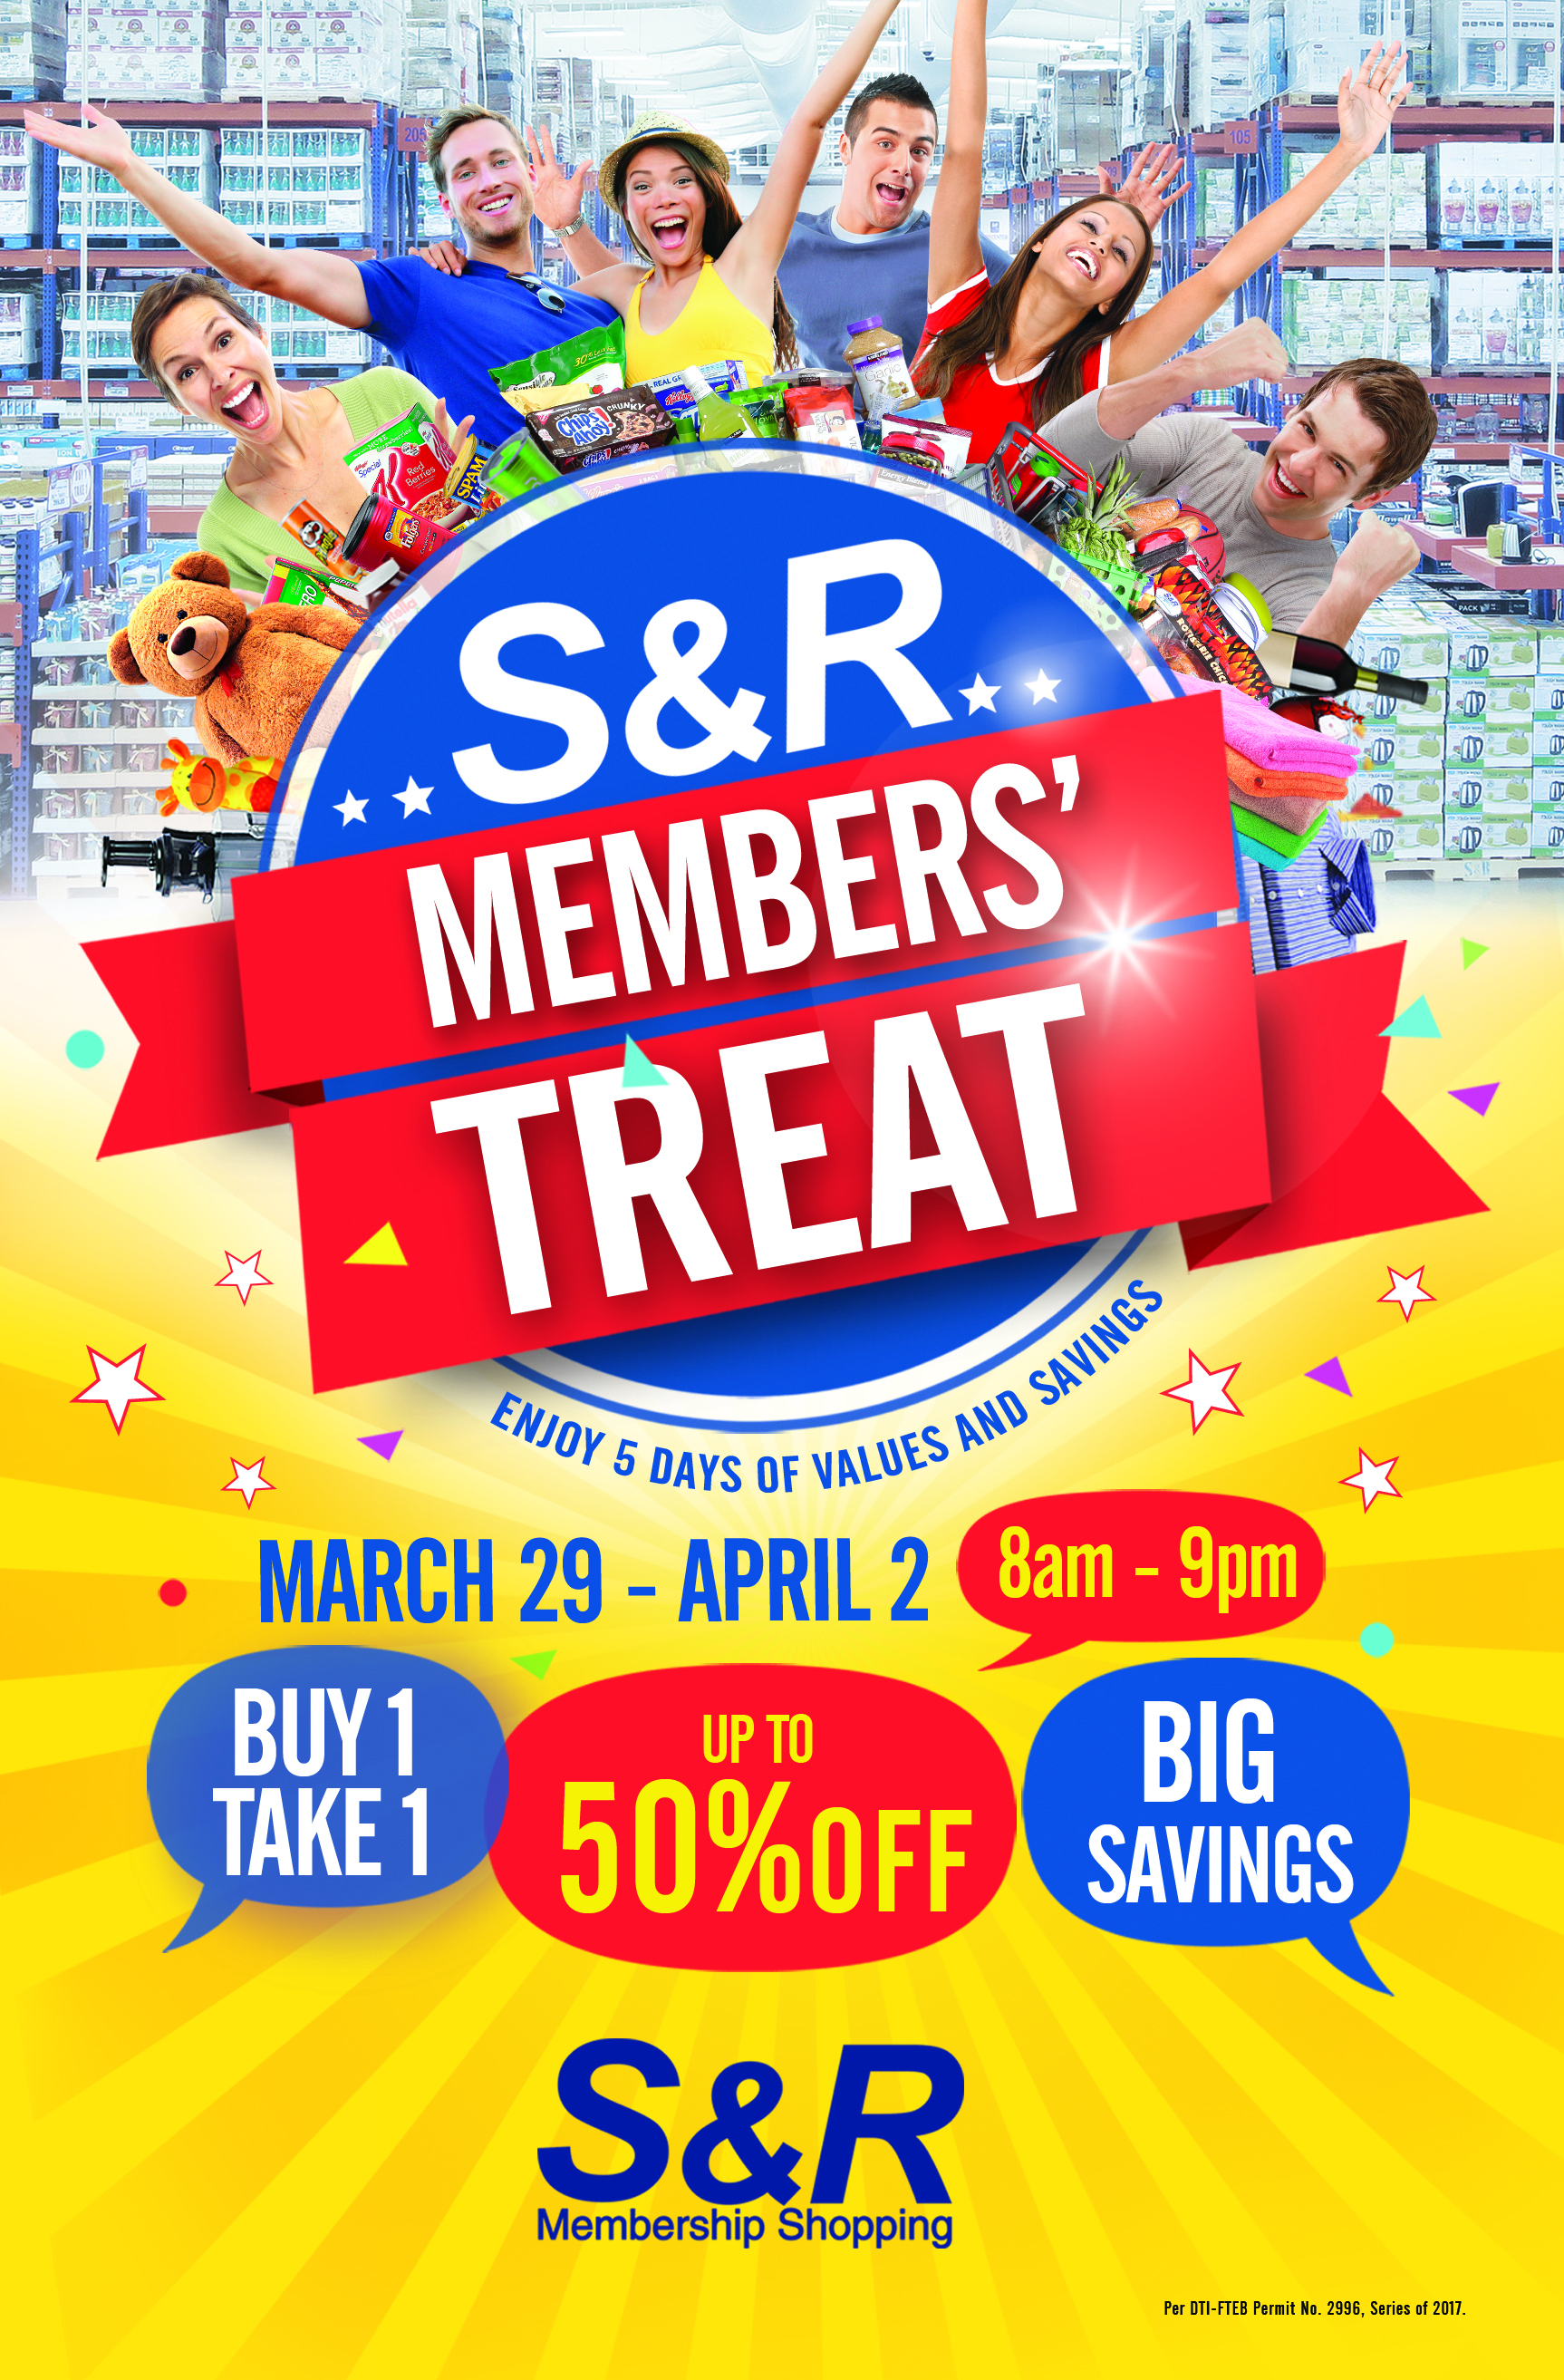 SALE ALERT: S&R Members’ Treat happening this March 29 to April 2